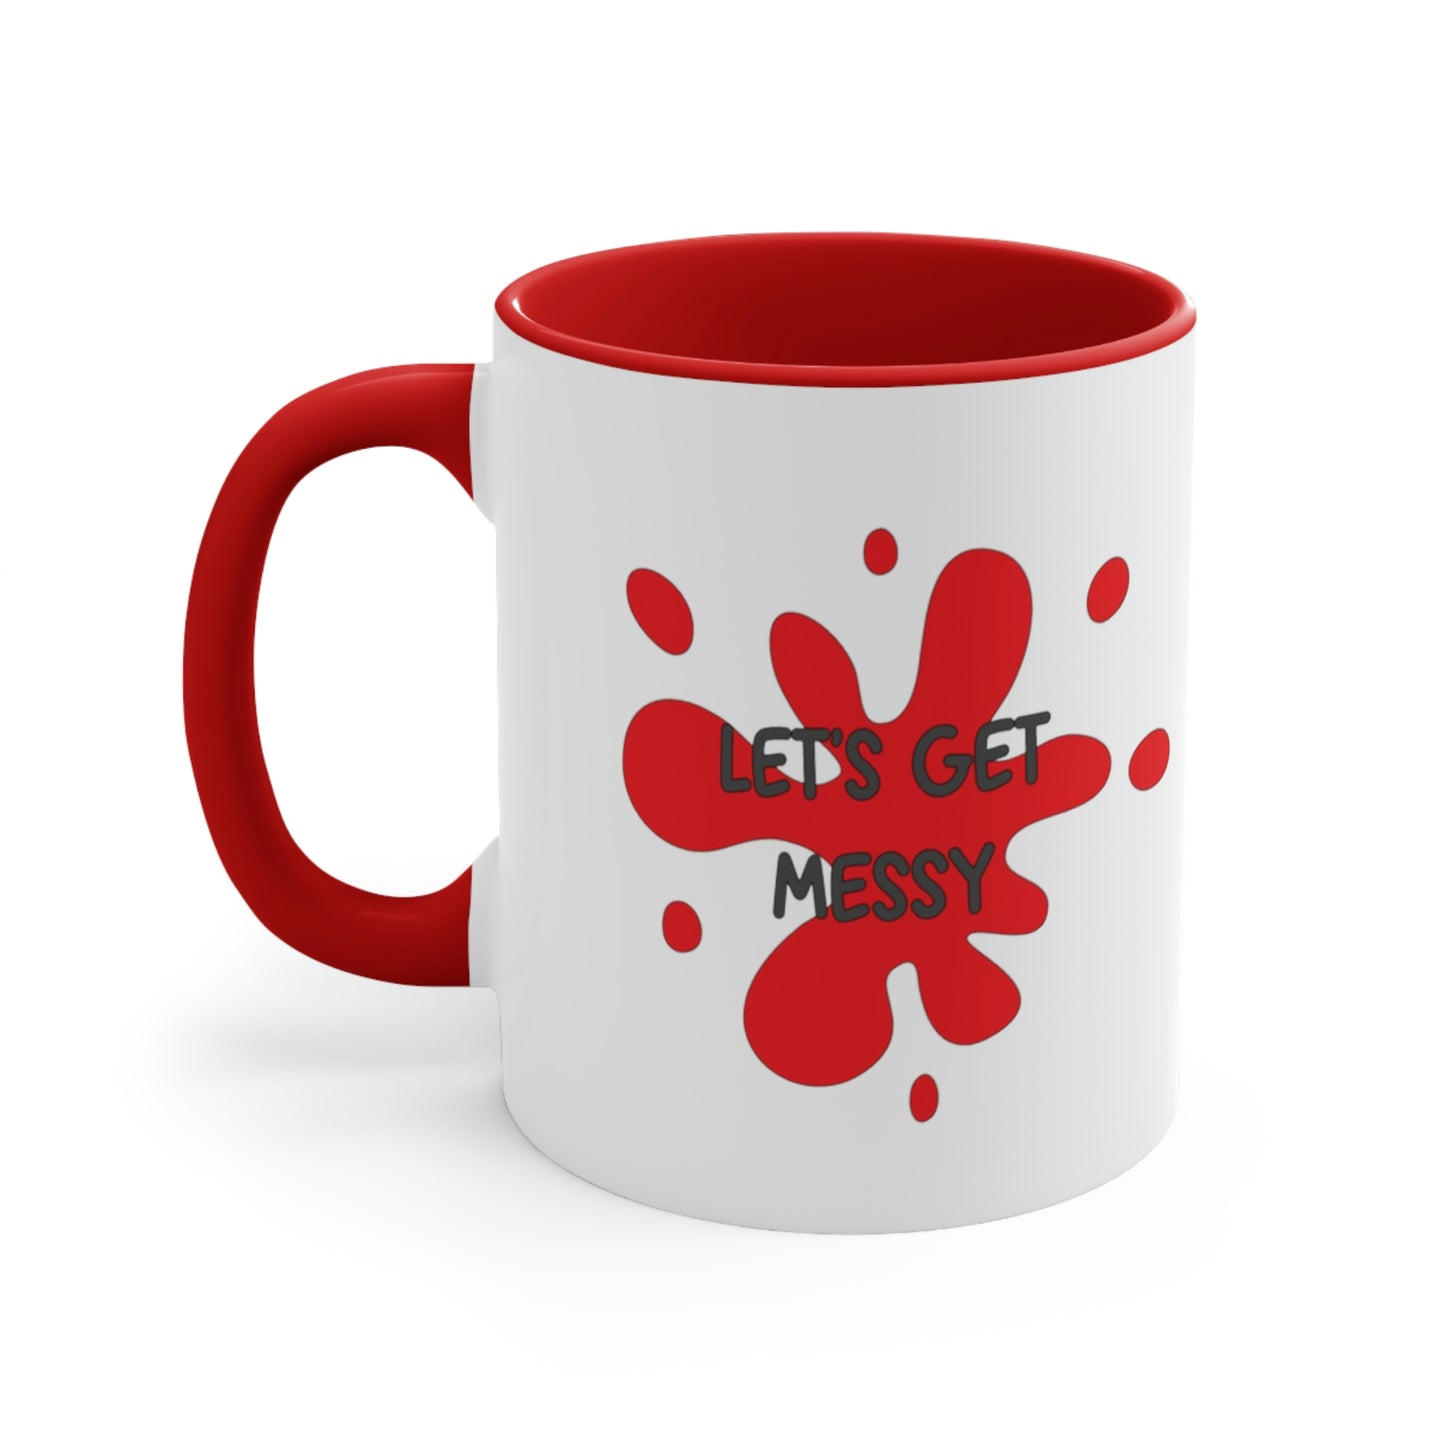 "Let's Get Messy" Accent Coffee Mug, 11oz